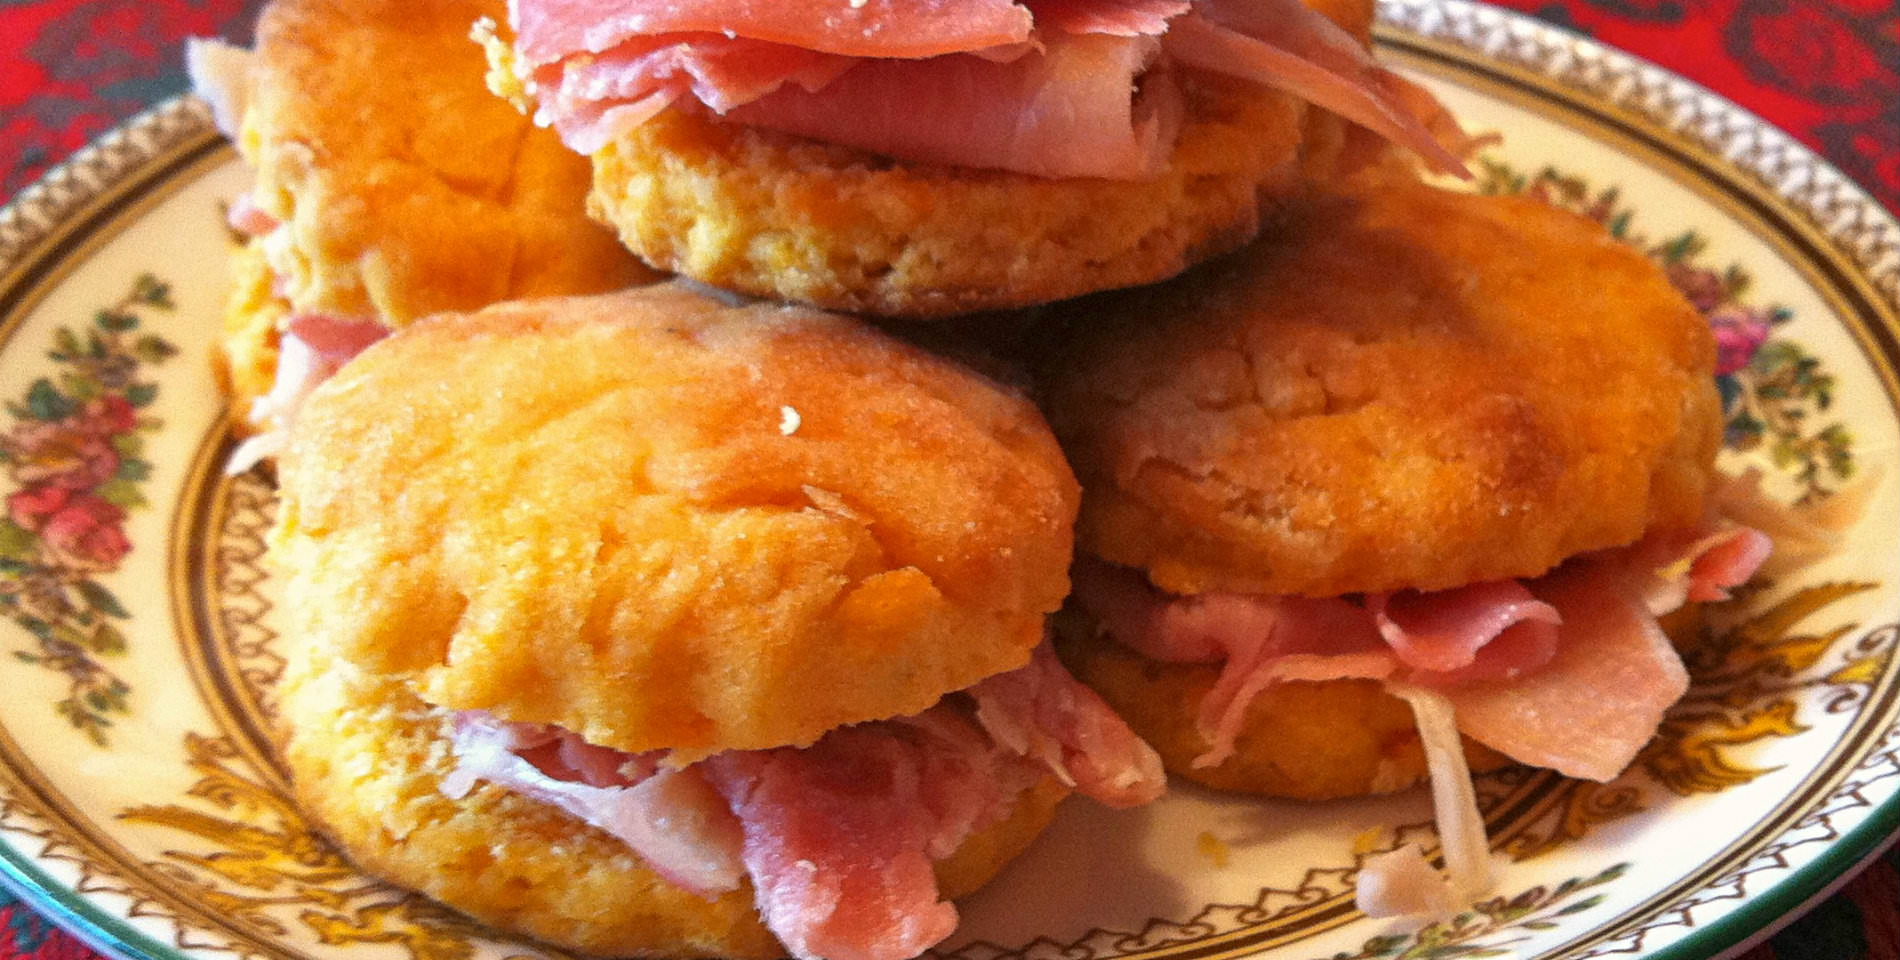 Sweet potato biscuits and Virginia ham served on a floral print plate atop a red tablecloth. 